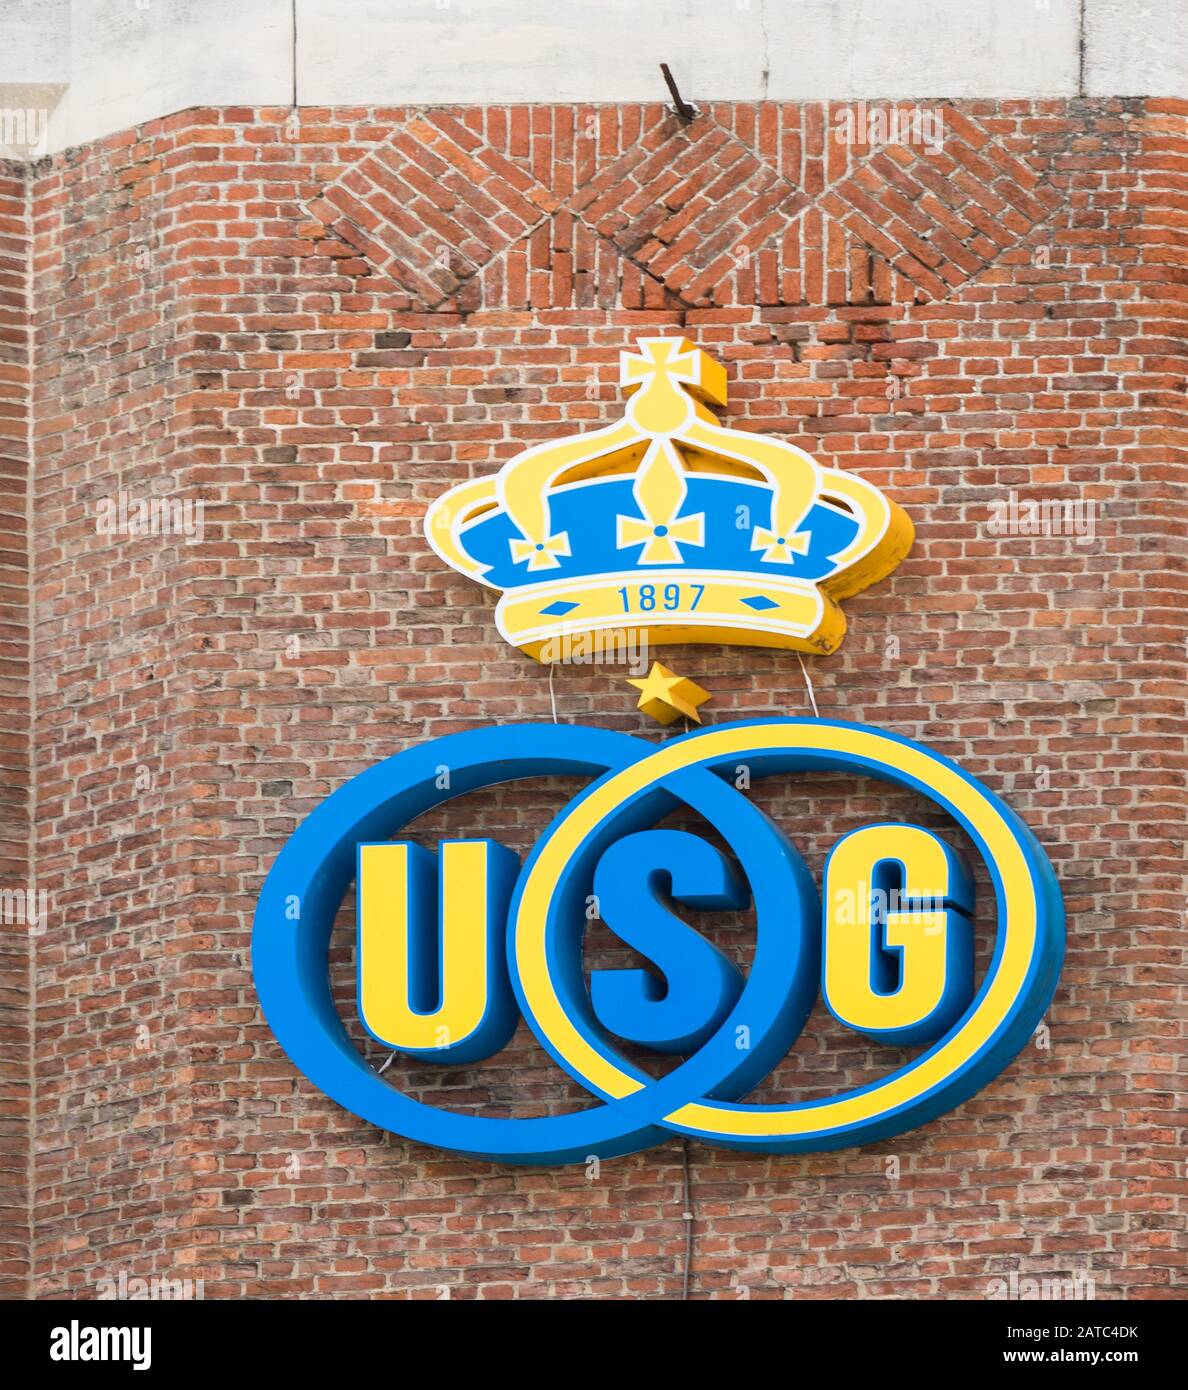 Saint Gilles, Brussels Capital Region / Belgium - 09 07 2019: Logo of the Union Saint Gilloise soccer club at the wall of the stadium Stock Photo